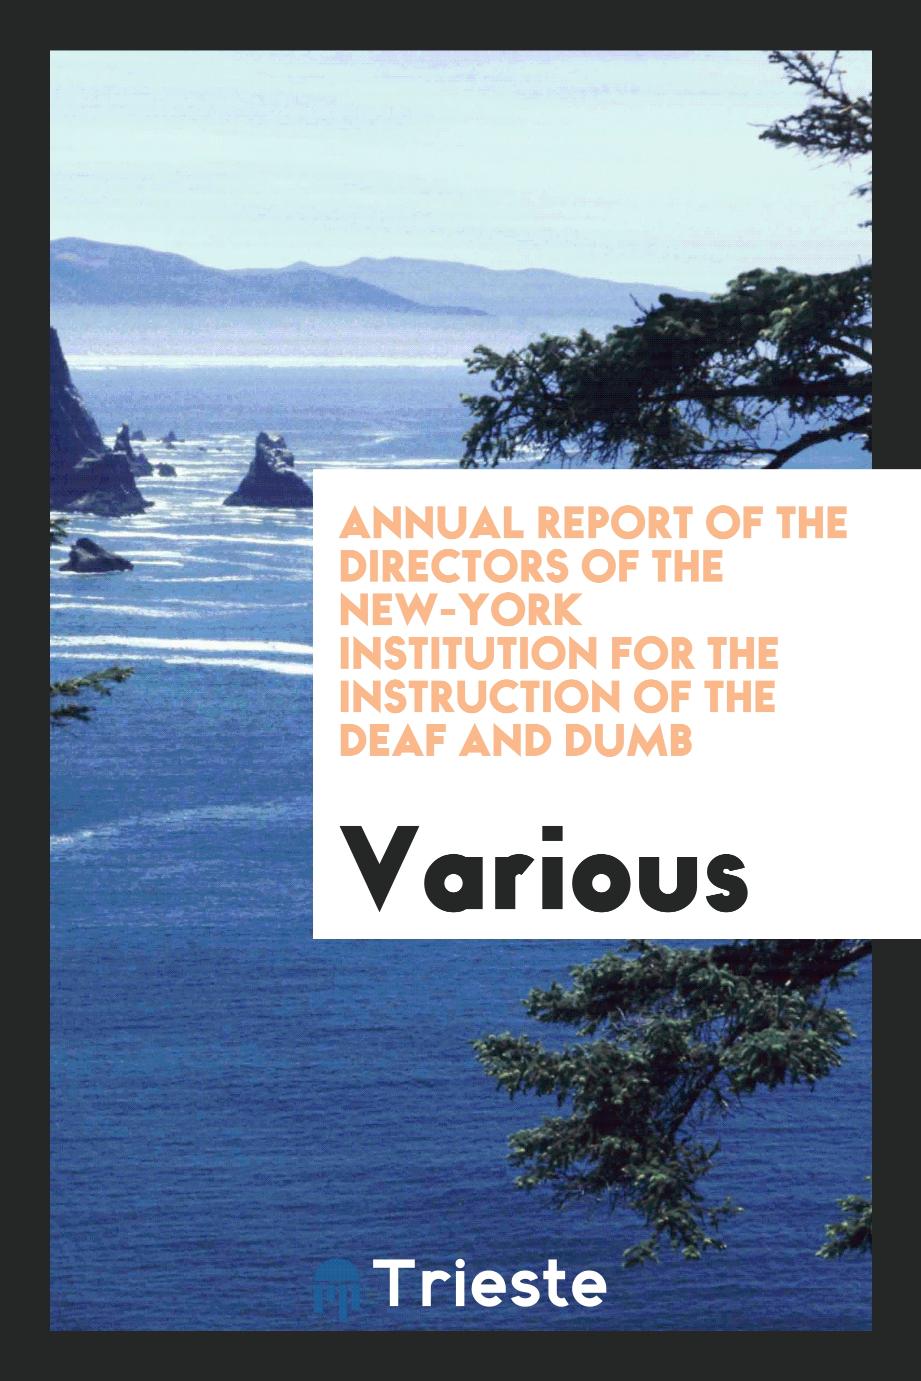 Annual Report of the Directors of the New-York Institution for the Instruction of the Deaf and Dumb